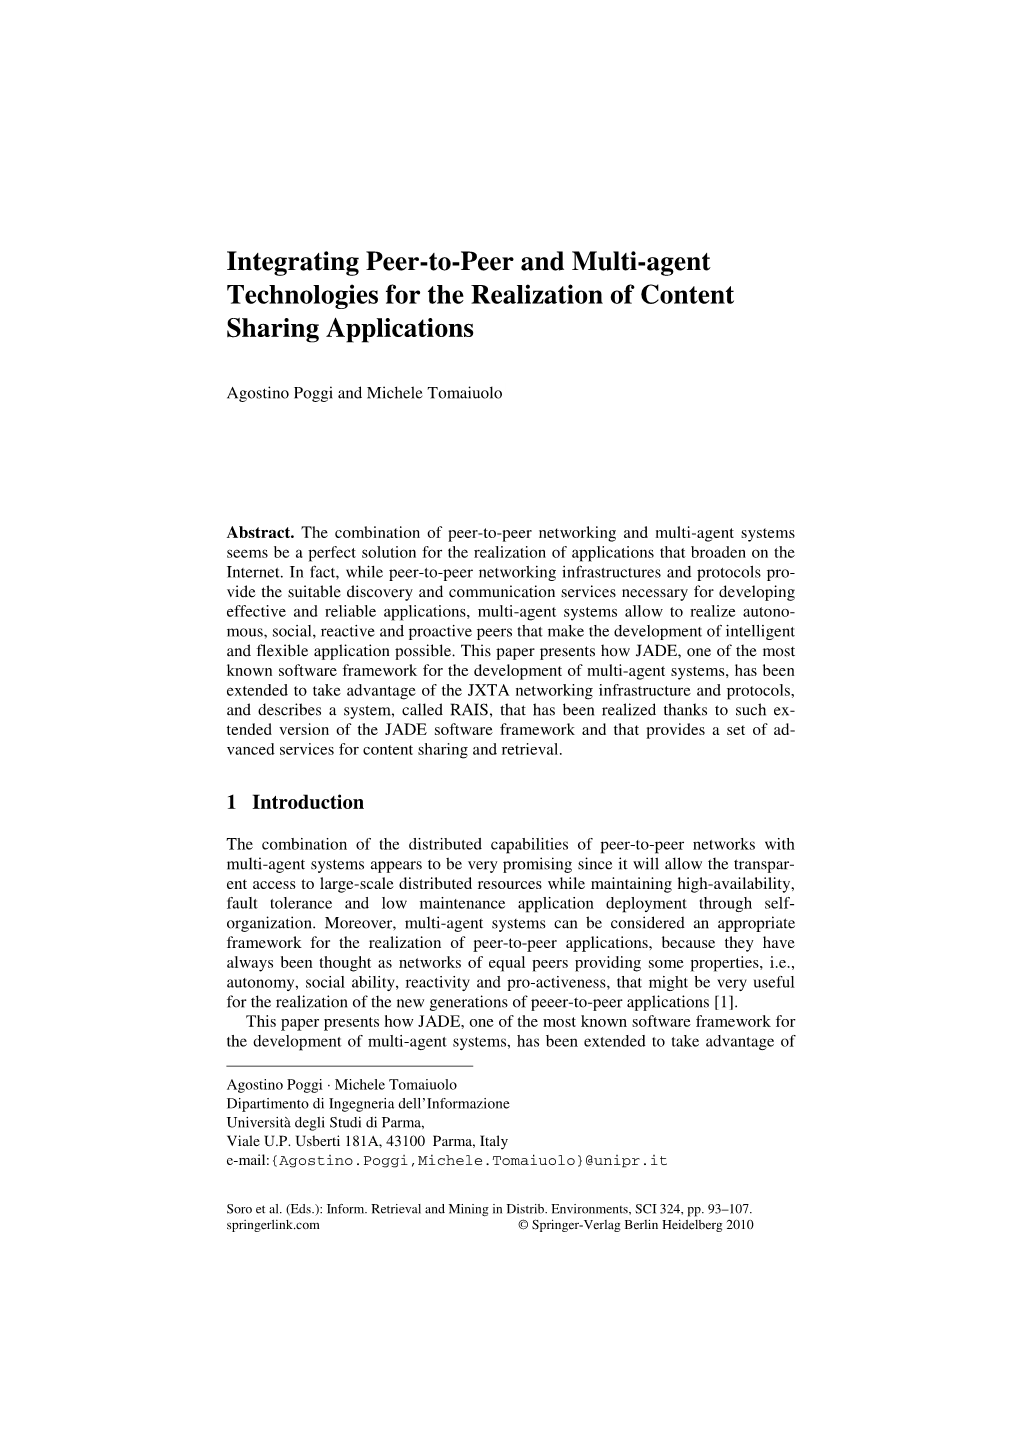 Integrating Peer-To-Peer and Multi-Agent Technologies for the Realization of Content Sharing Applications